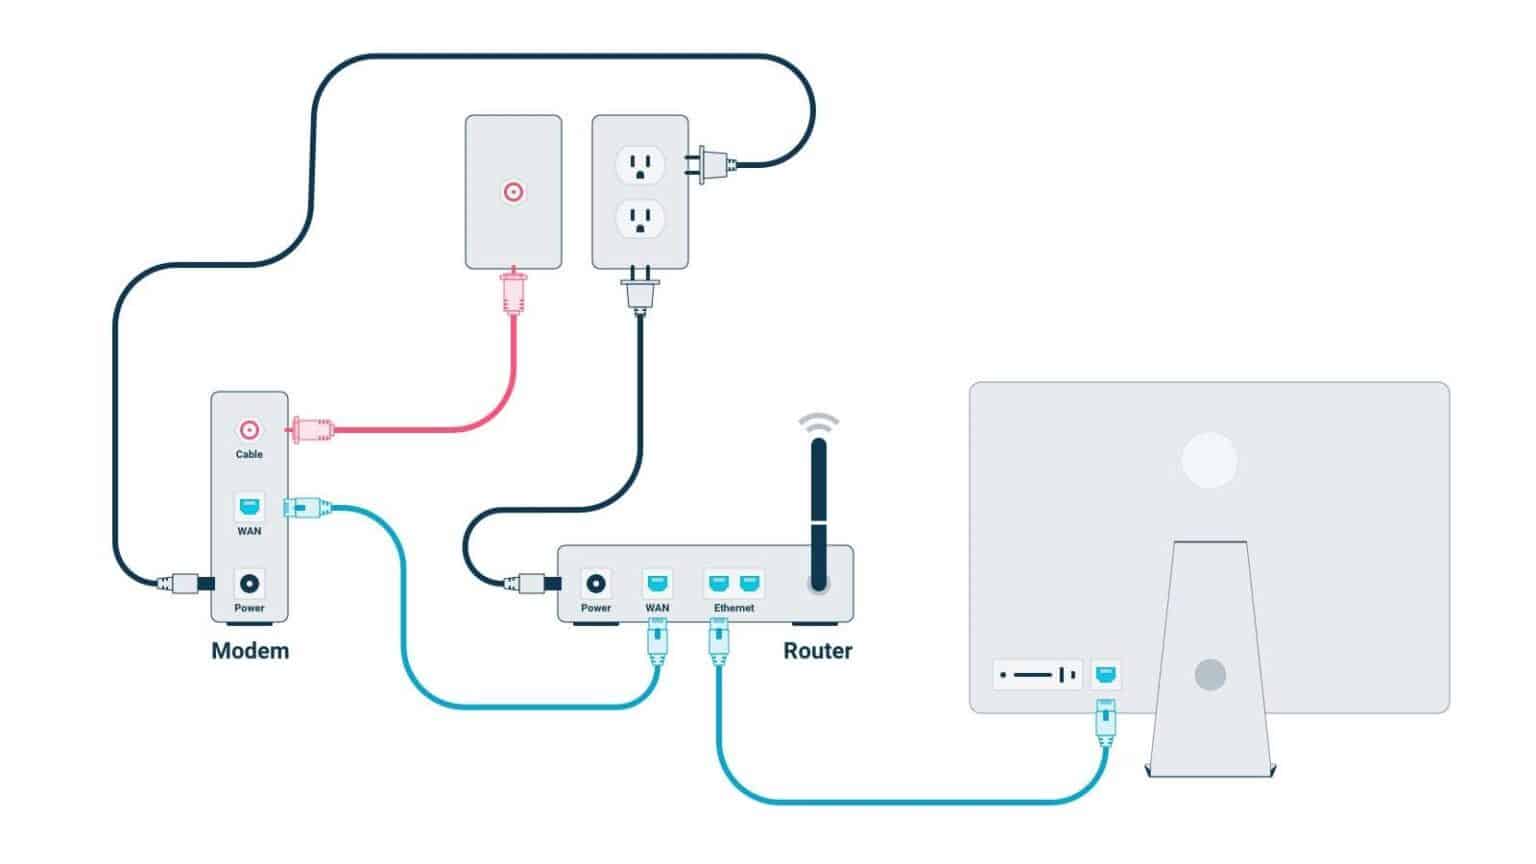 Use a Wired or Ethernet Connection